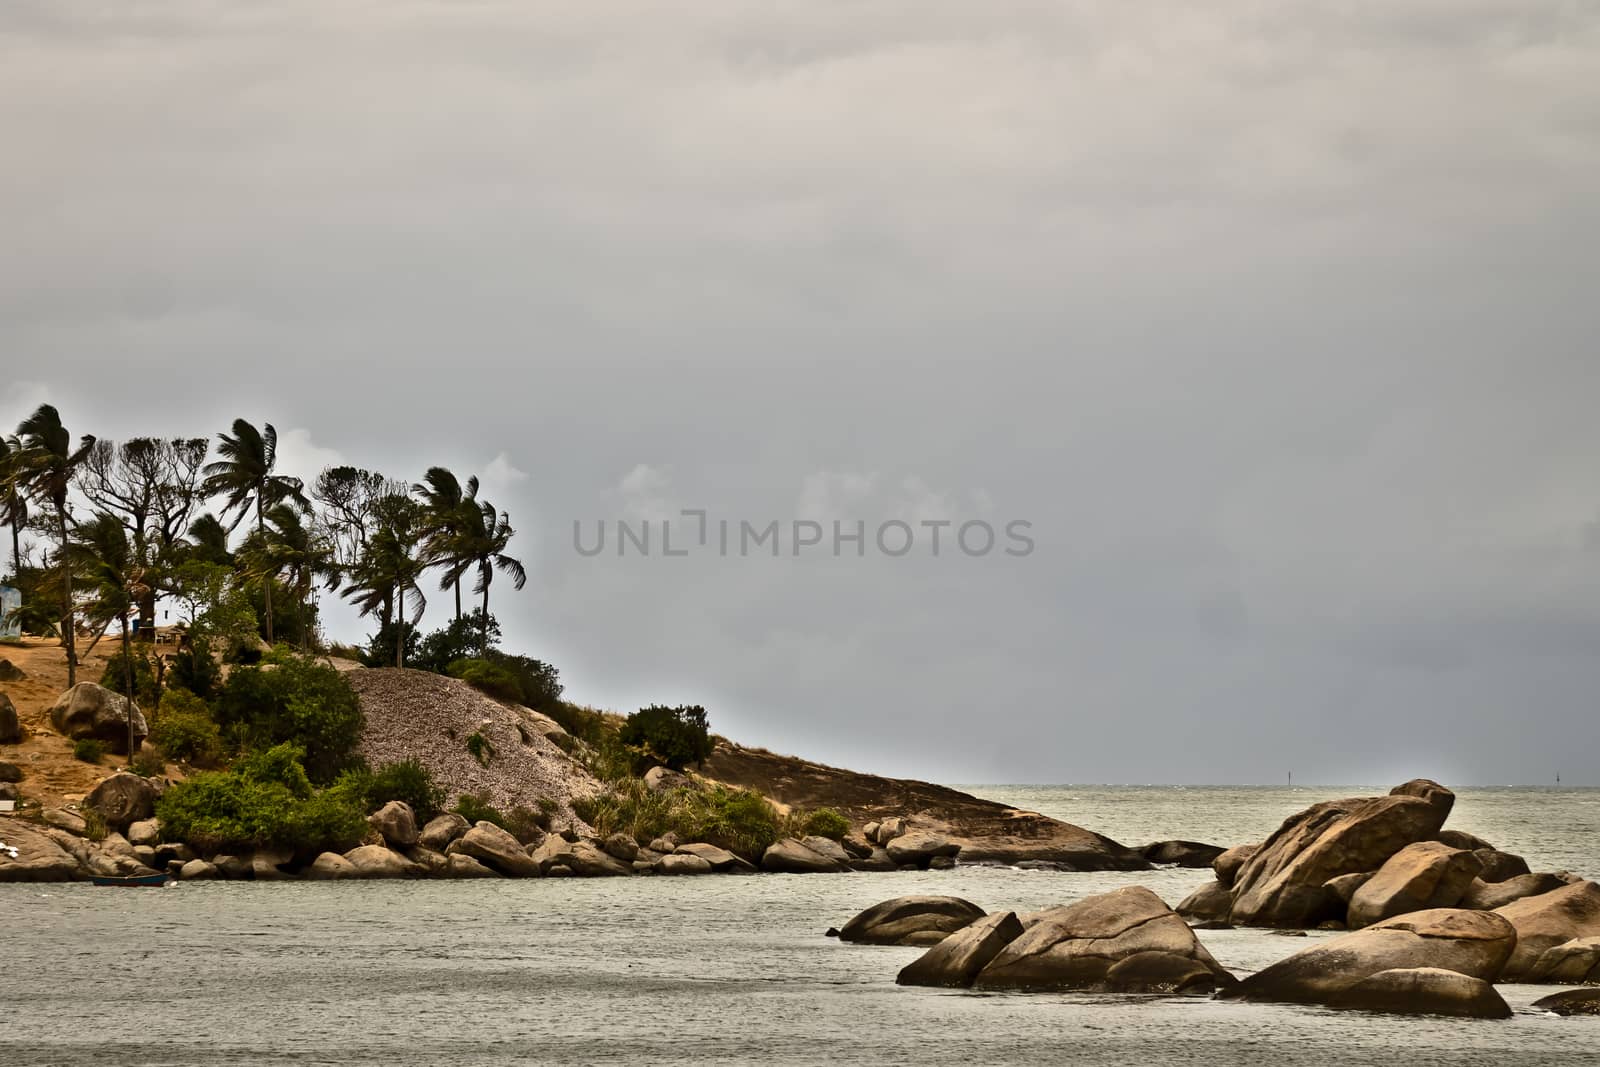 view of island with palm trees and rocks against cloudy sky